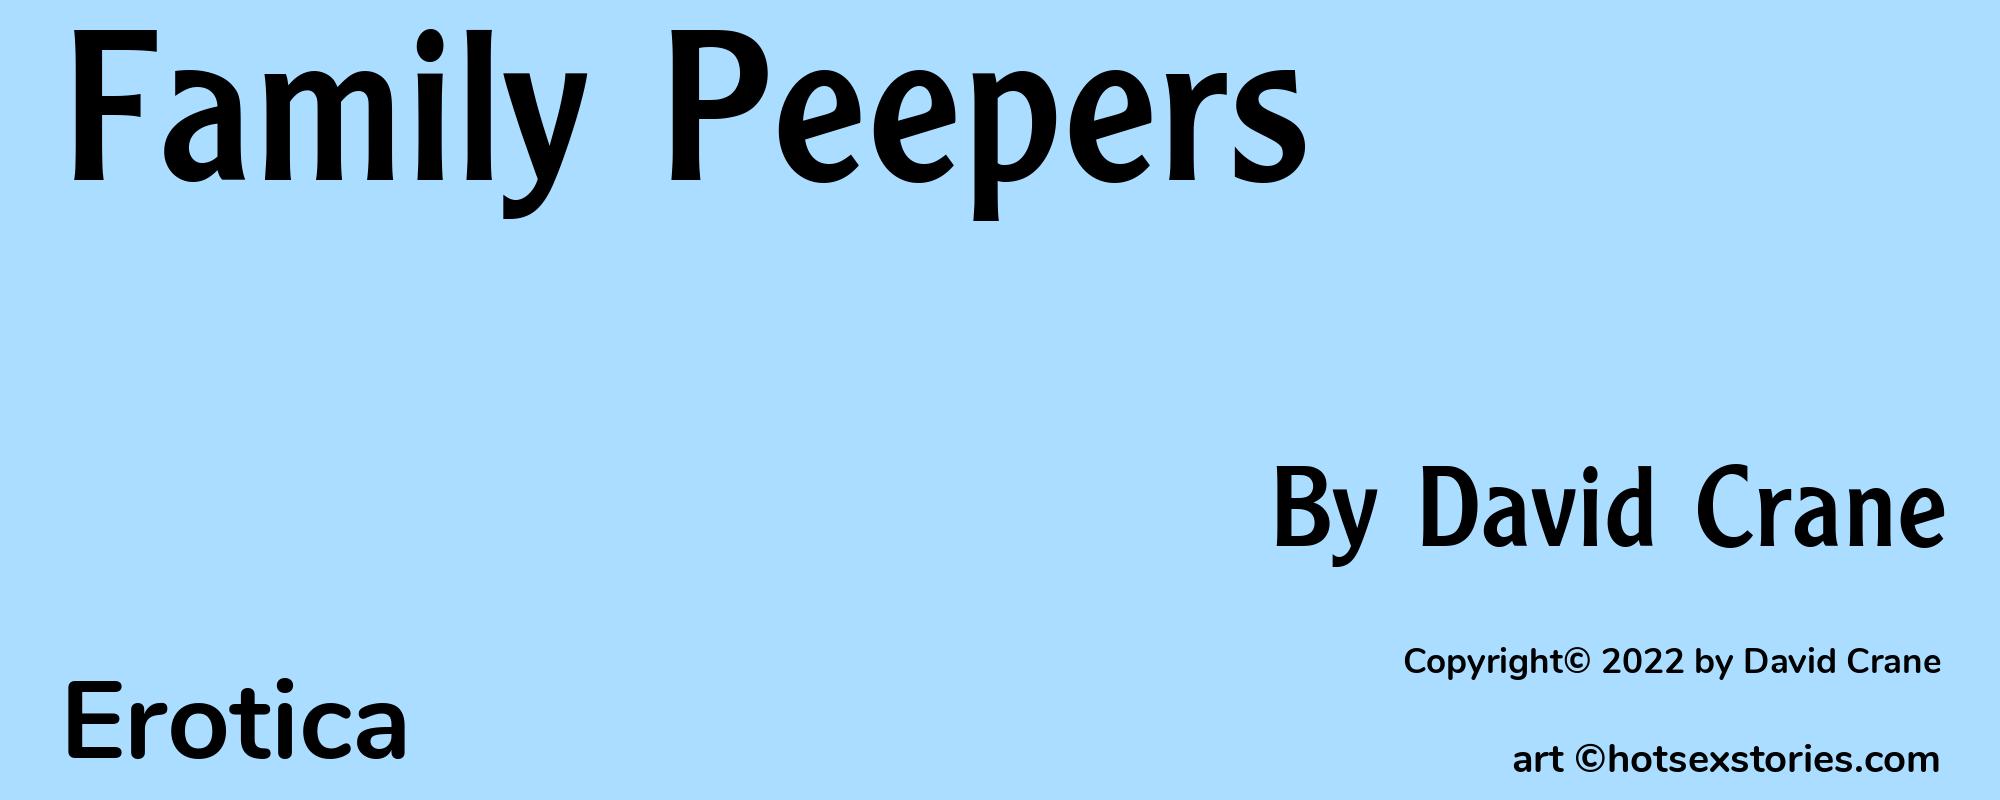 Family Peepers - Cover